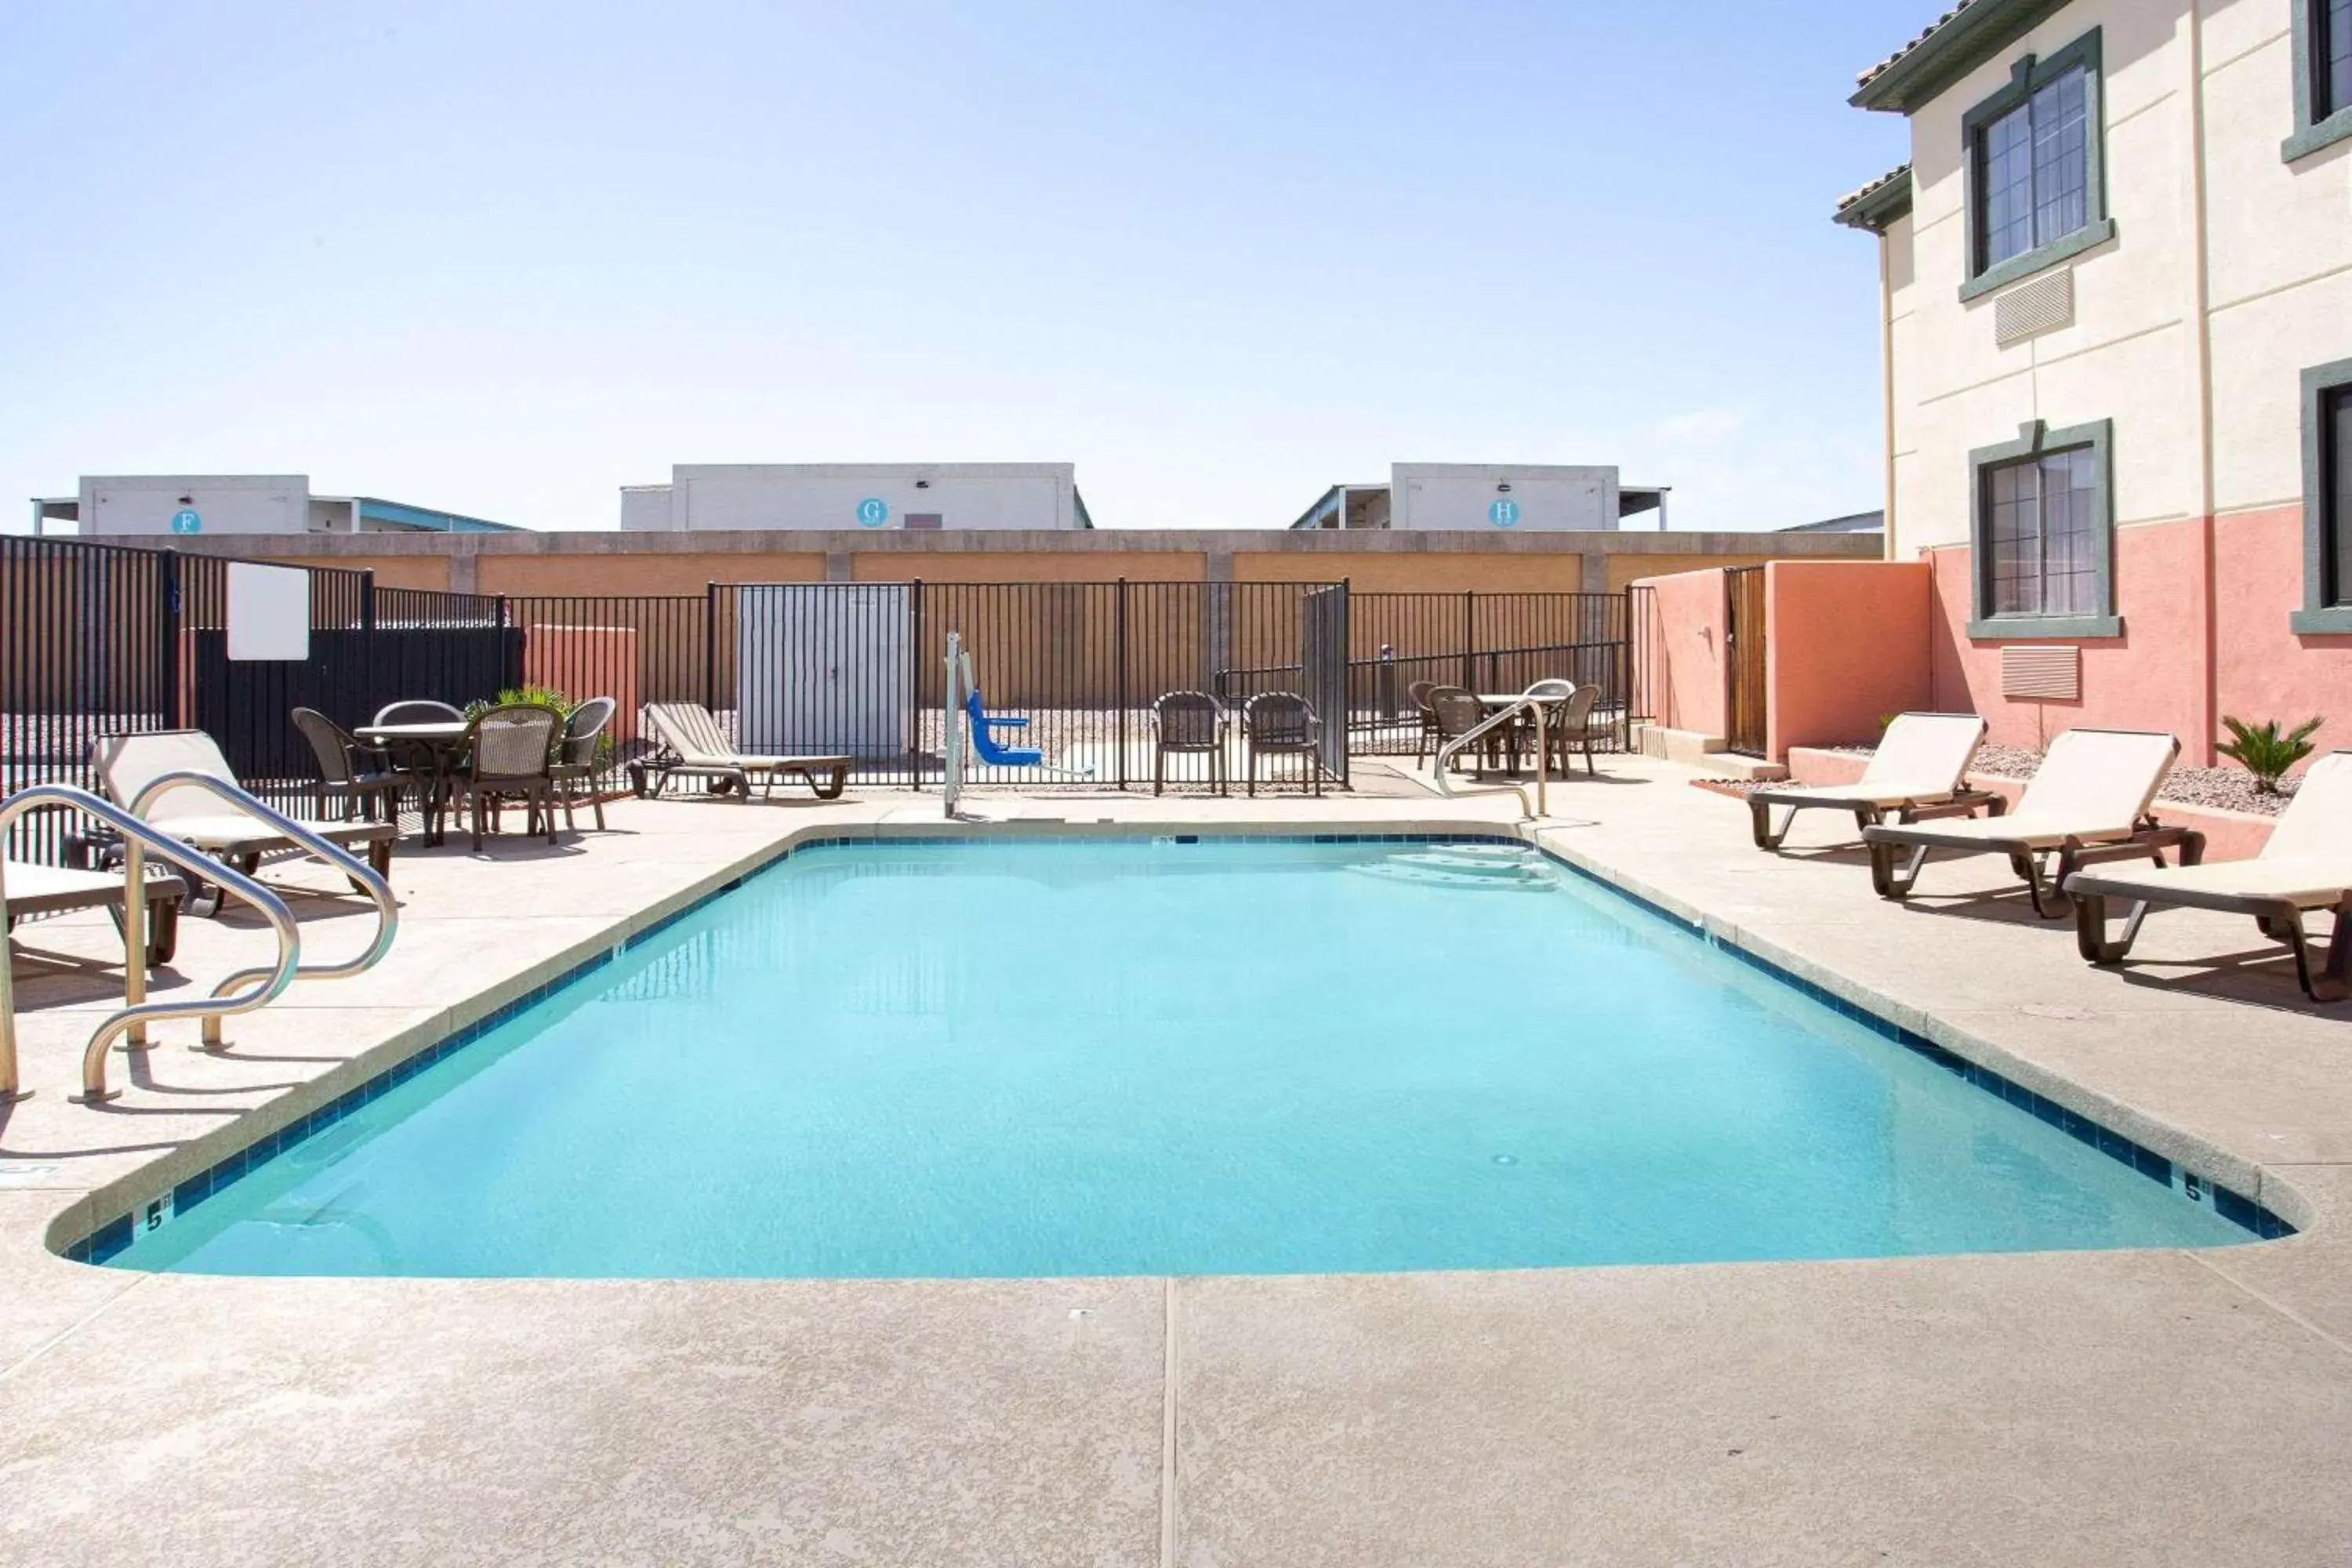 On site, Swimming Pool in Baymont by Wyndham Phoenix I-10 near 51st Ave